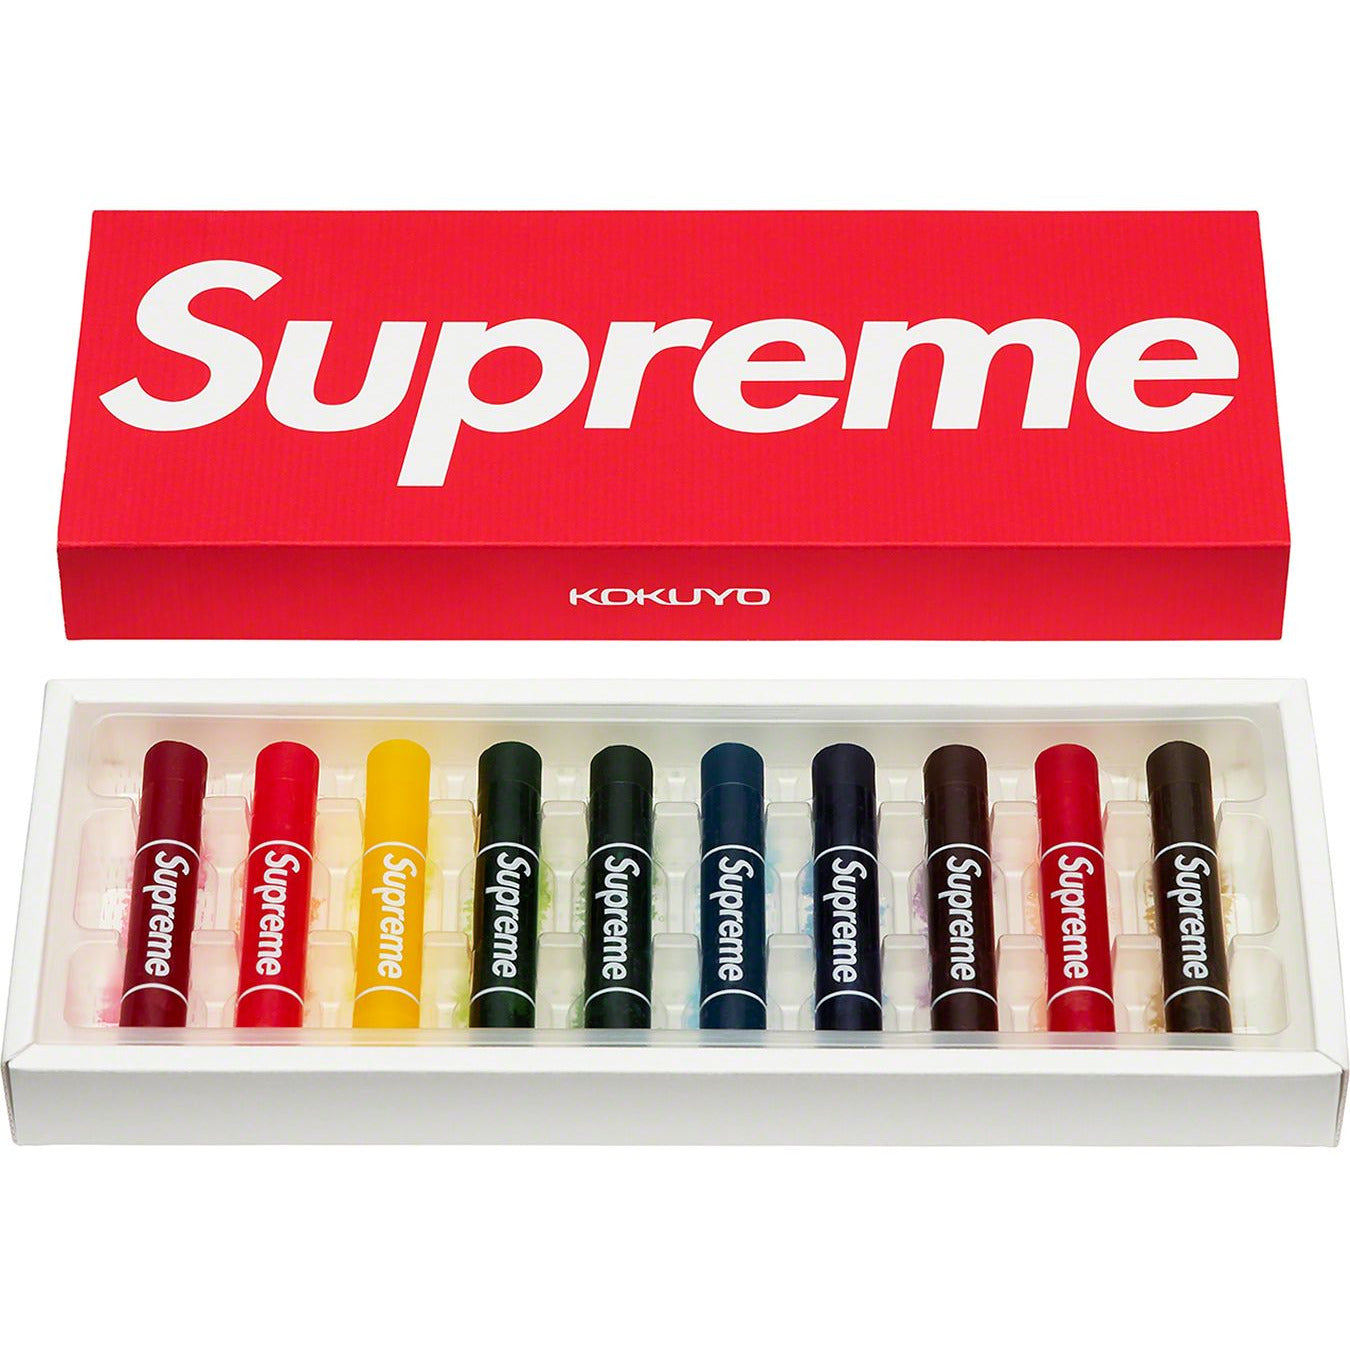 Supreme Kokuyo Translucent Crayons (Pack of 10) Multicolor from Supreme